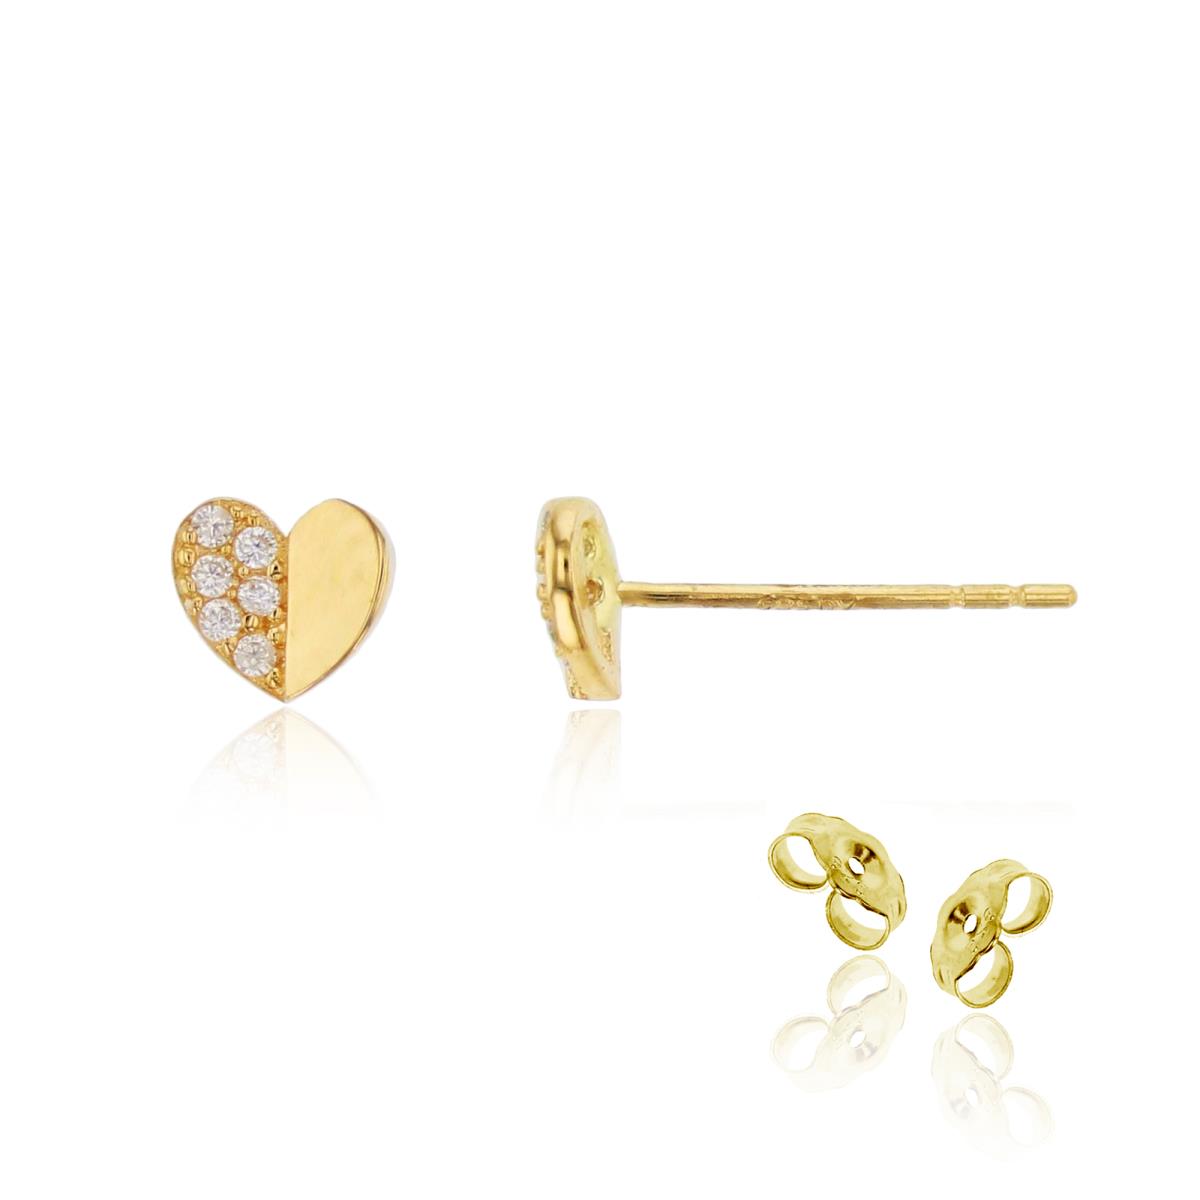 14K Yellow Gold Half Polished Half Paved Heart Stud Earring with 4.5mm Clutch